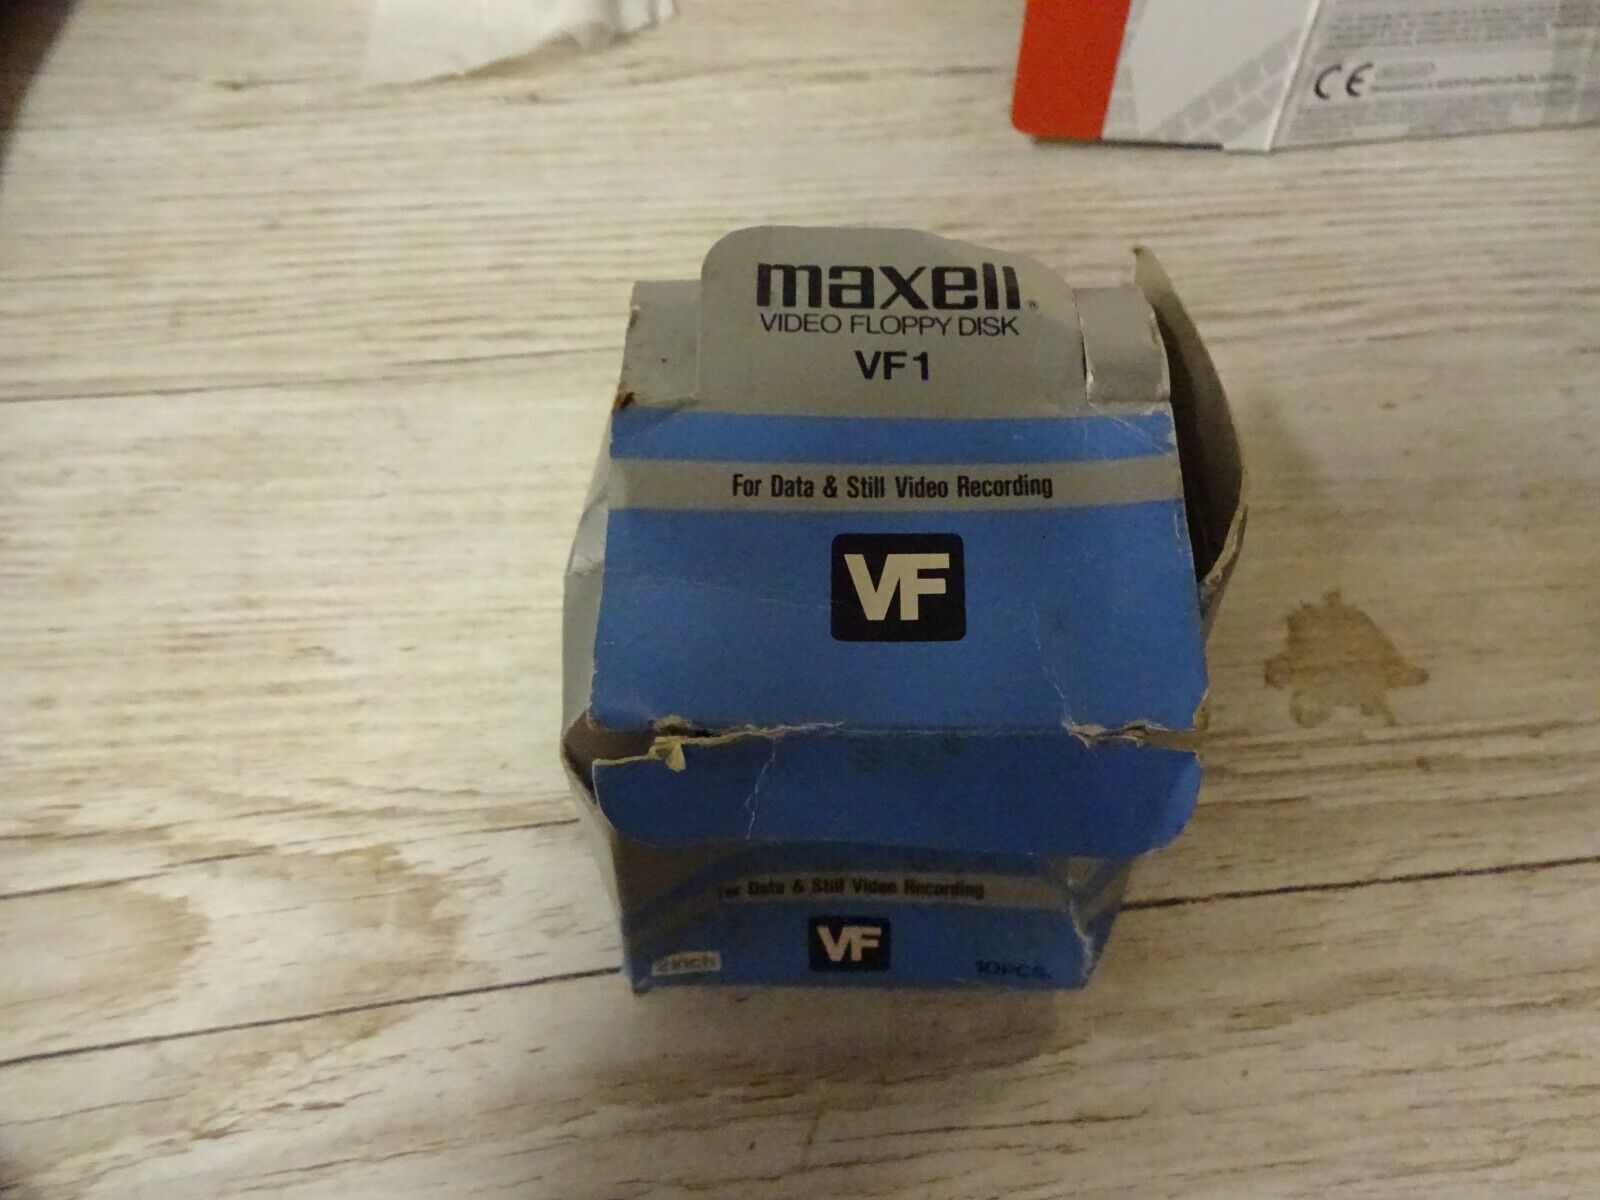 Vintage Maxell Video Floppy Disks VF1 set of 6 and original box early 1990's